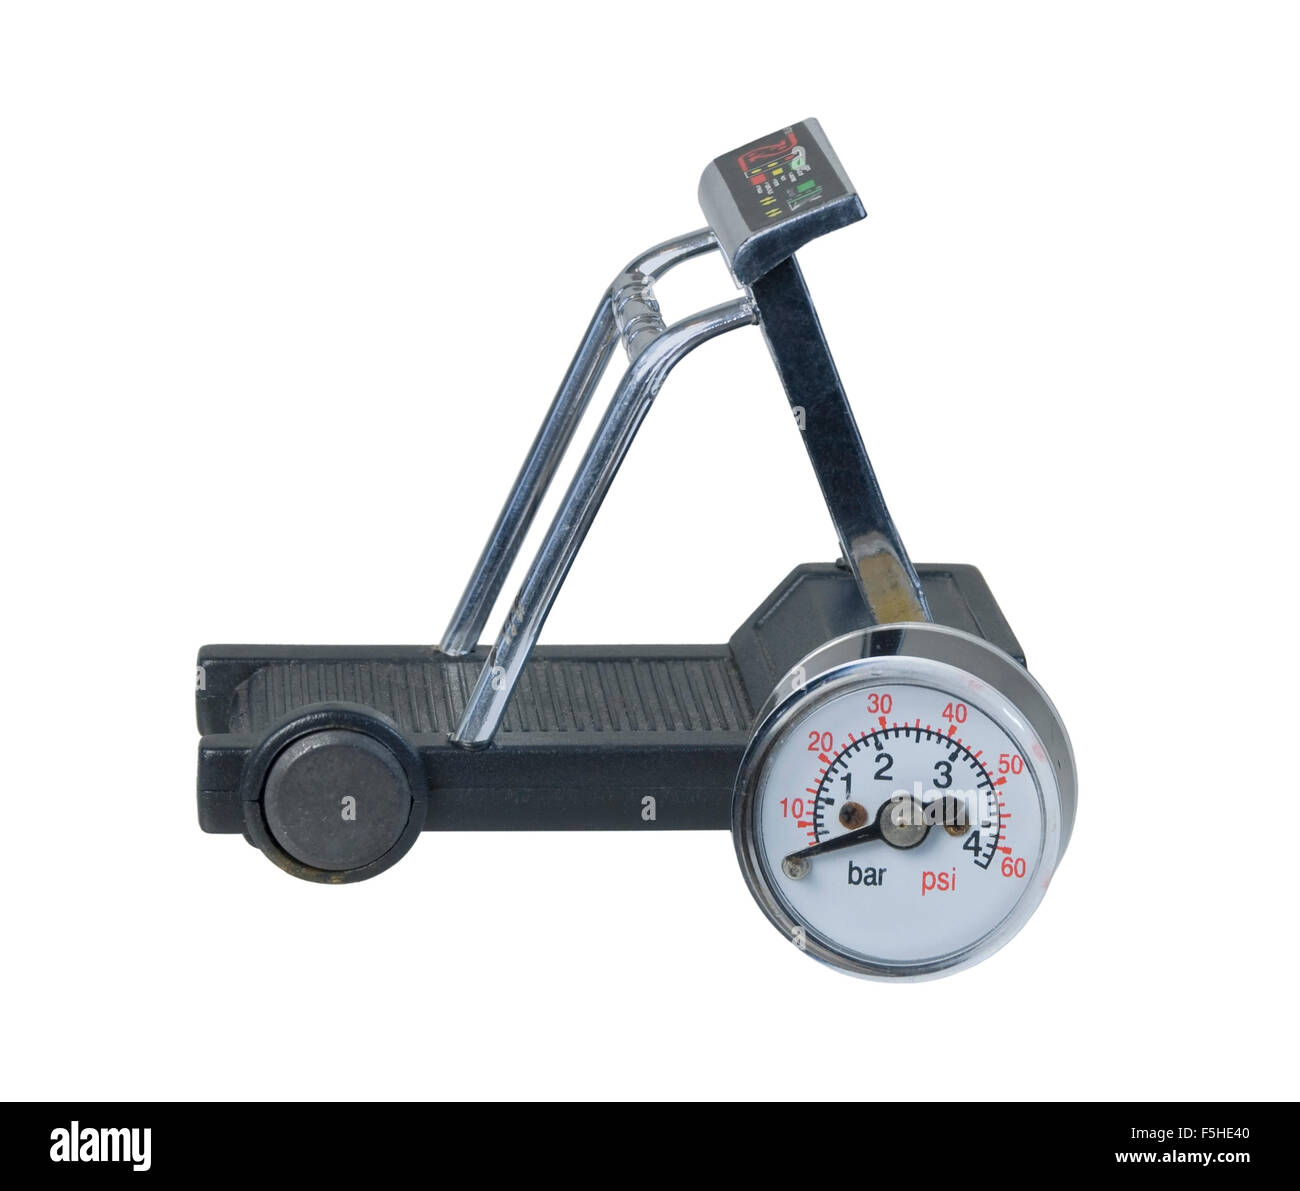 Treadmill with pressure gauge used for non-transport peddling for health fitness - path included Stock Photo